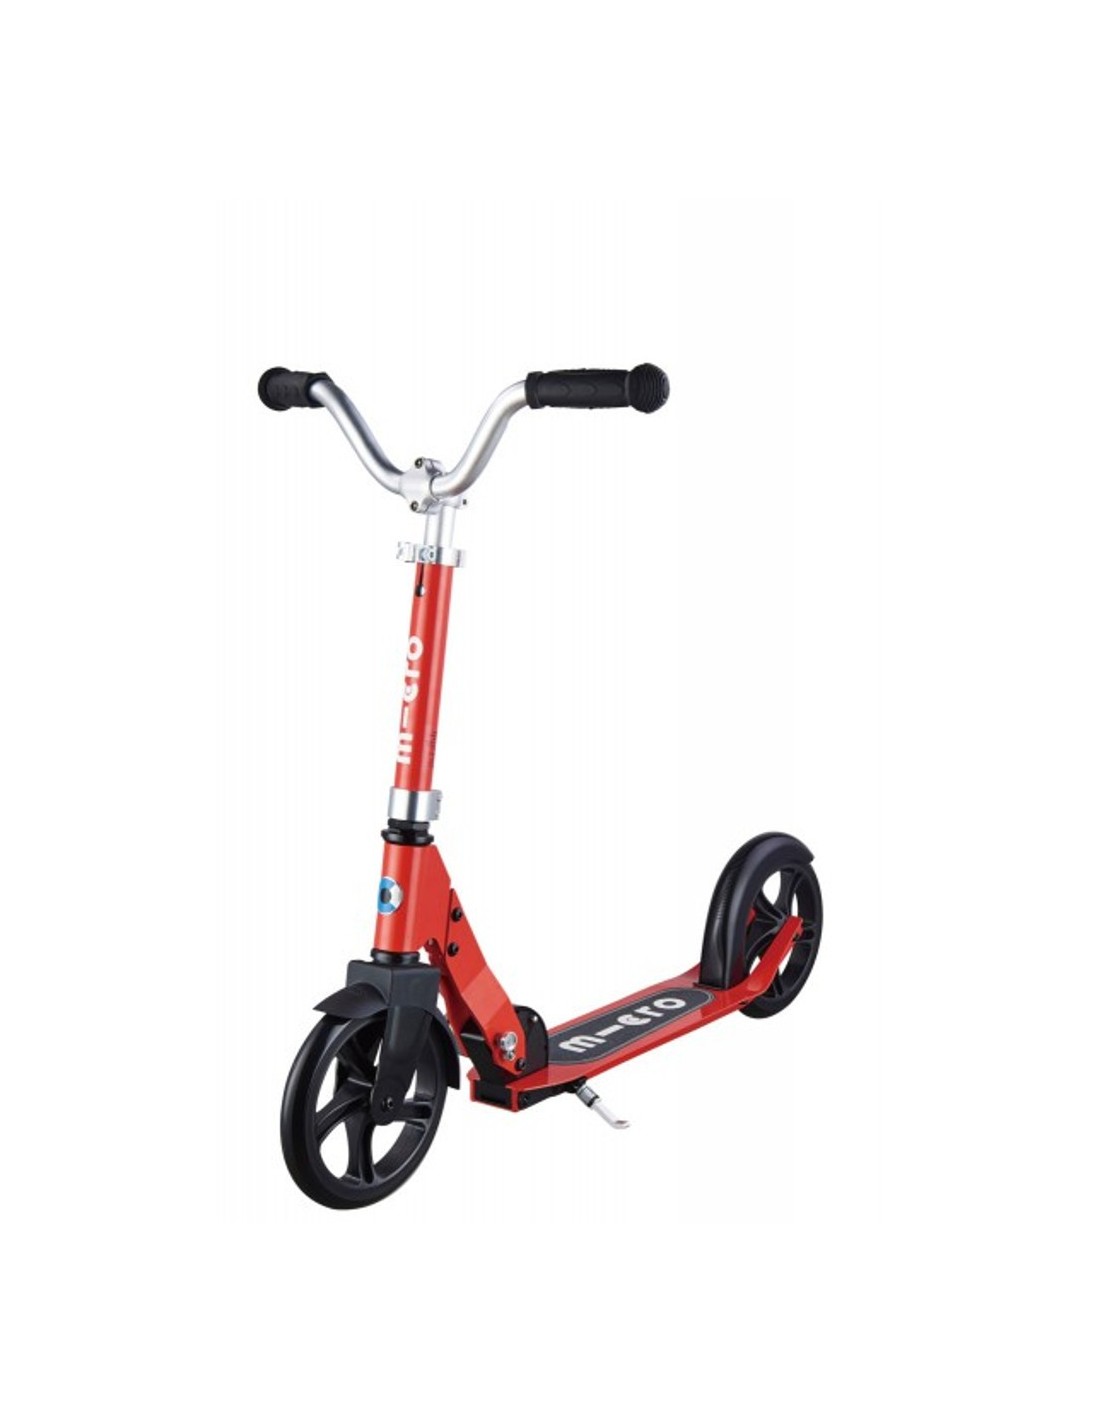 Micro Scooter Cruiser red Scooterreifen - PU Reifen, Scooterart - Scooter, Scooterfarbe - Rot, von Micro Scooter